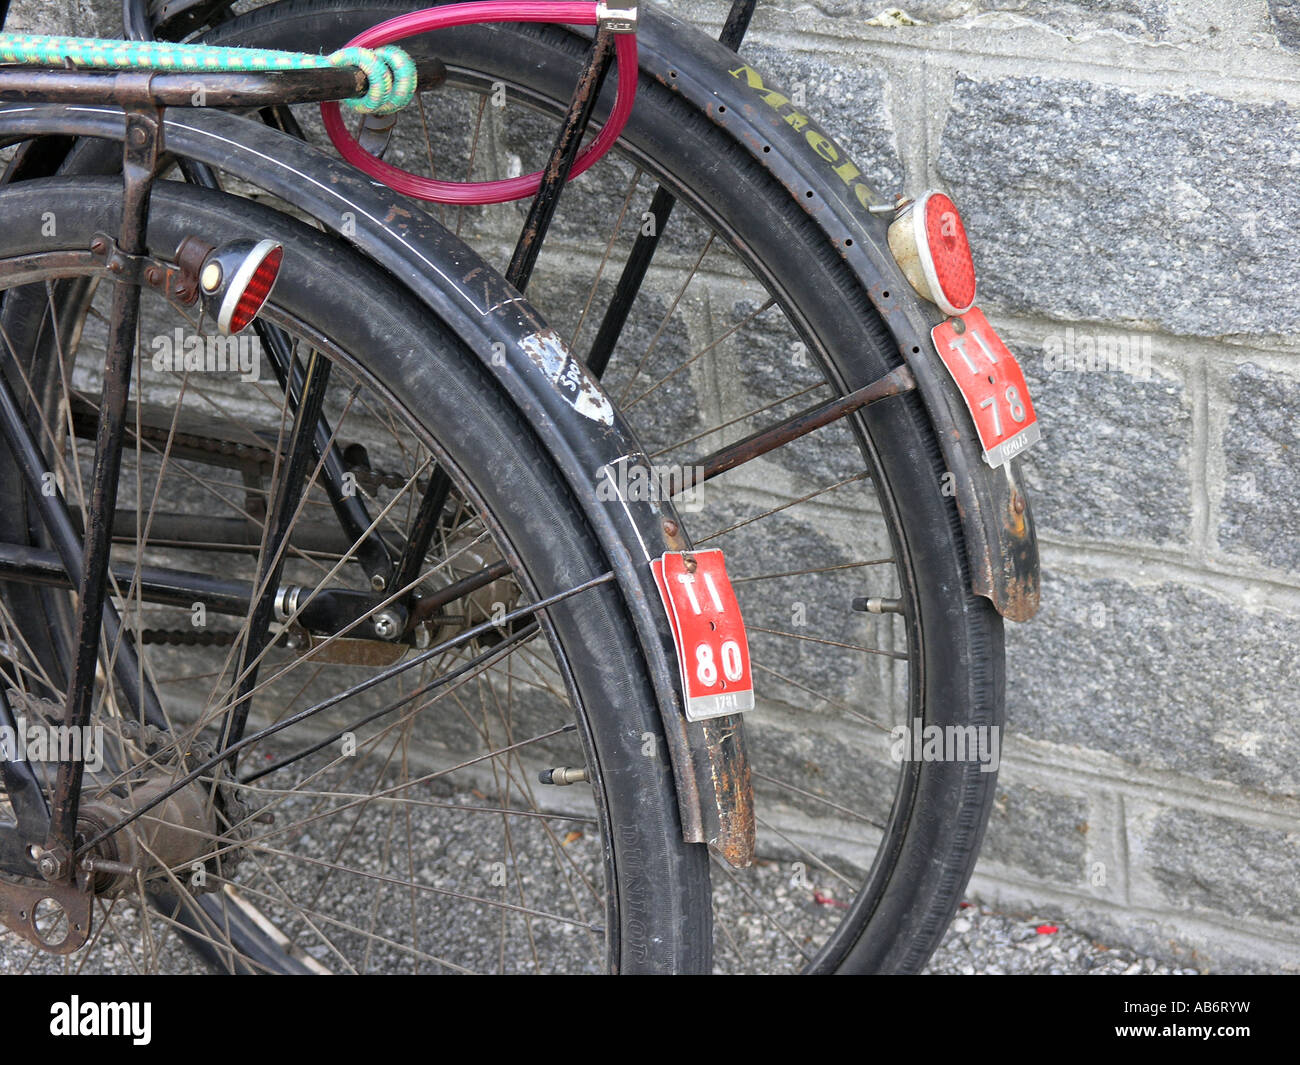 Page 2 - Fahrrader High Resolution Stock Photography and Images - Alamy